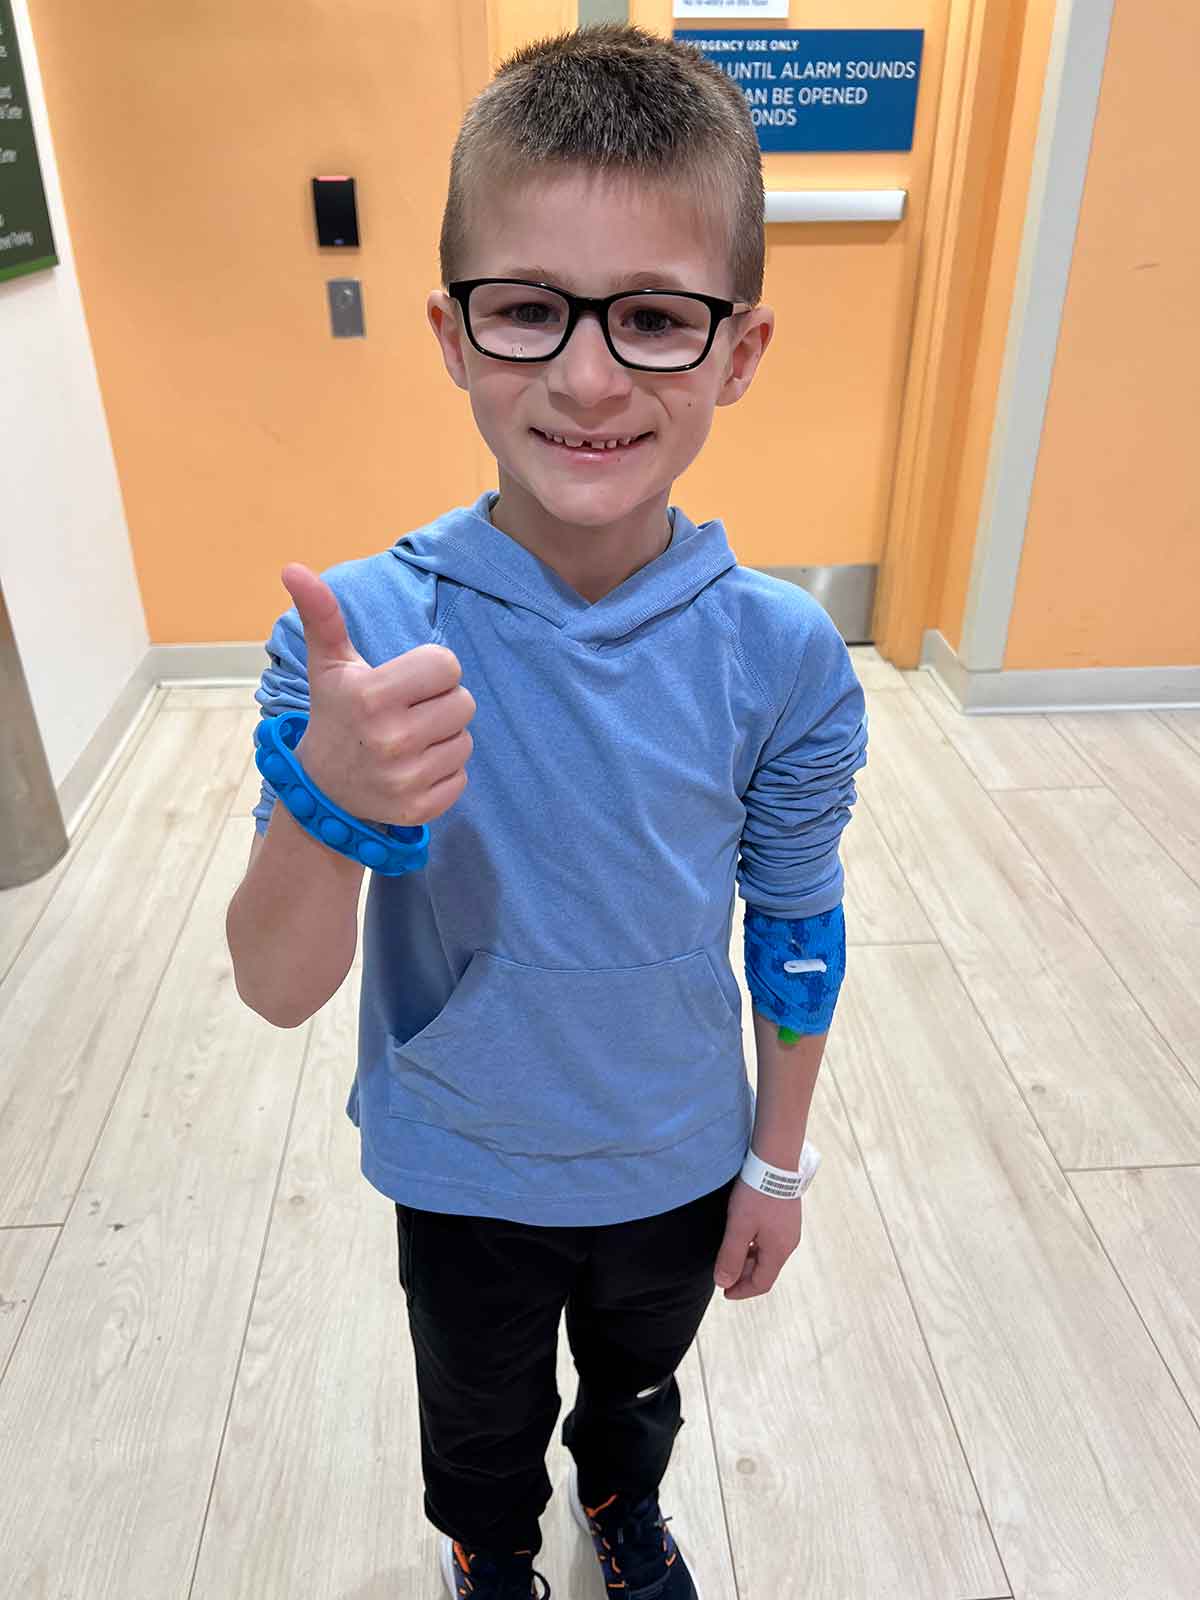 Little boy with black glasses and a blue hoodie, smiling and giving a thumbs up.